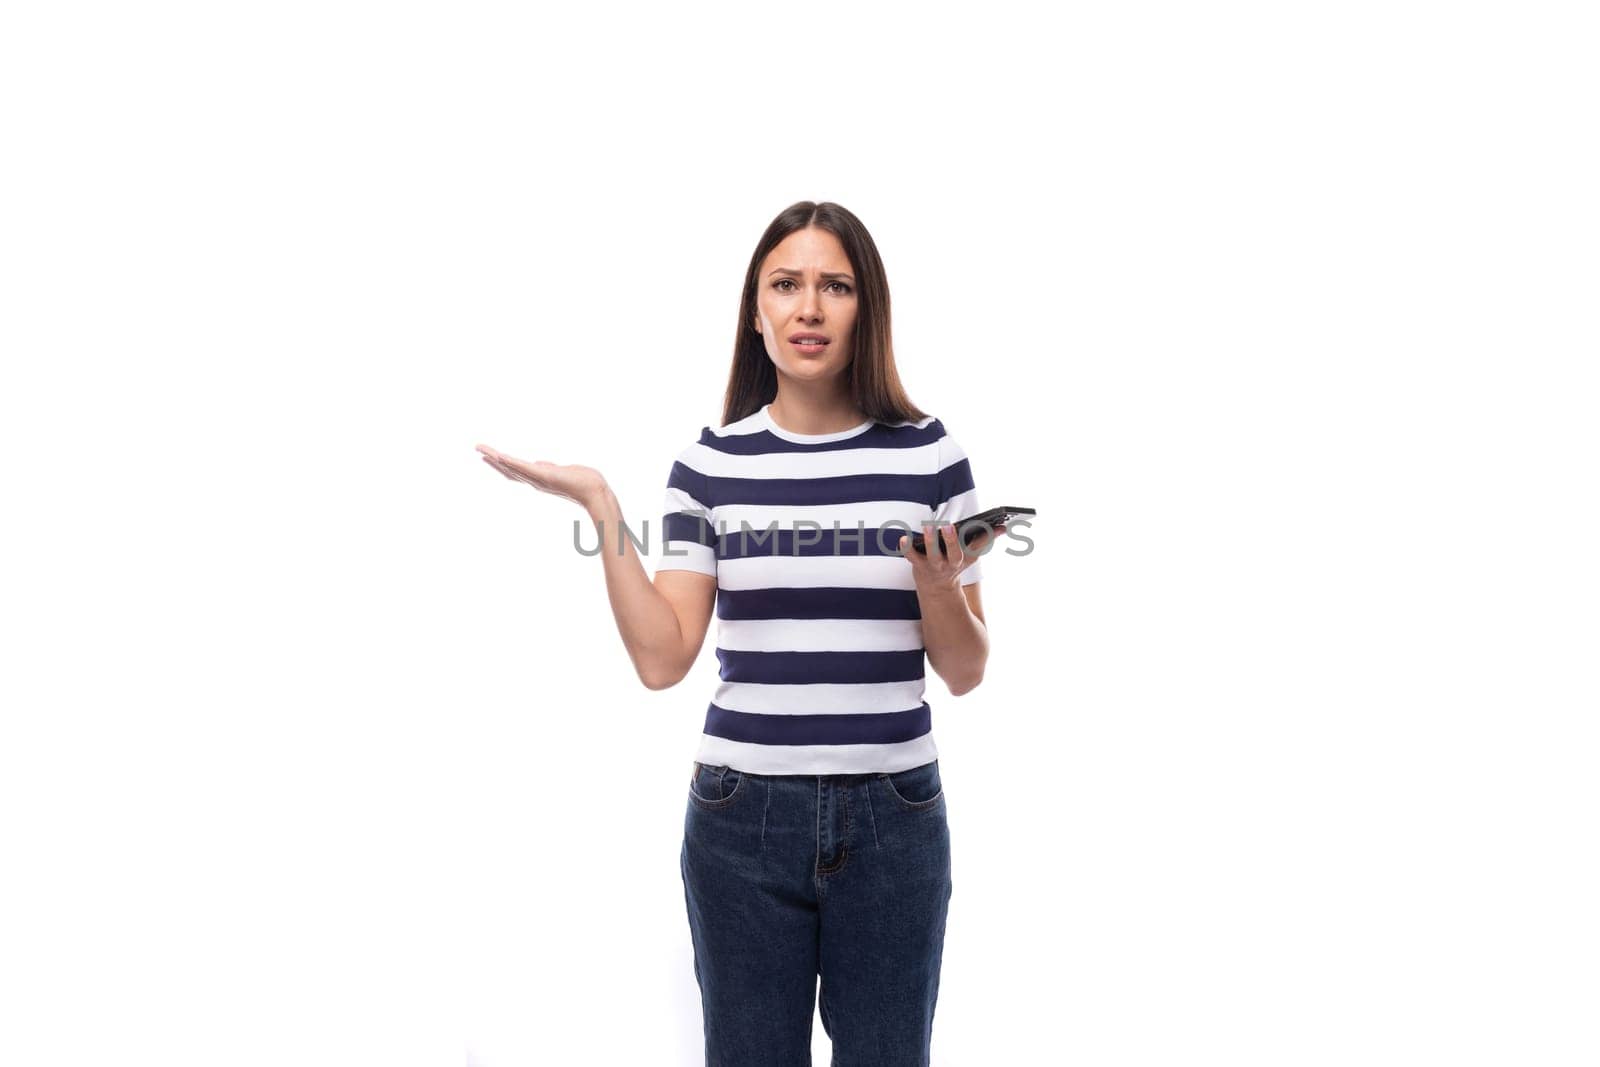 charming young european woman with black straight hair in a striped black and white t-shirt and jeans doubts spreading her arms.